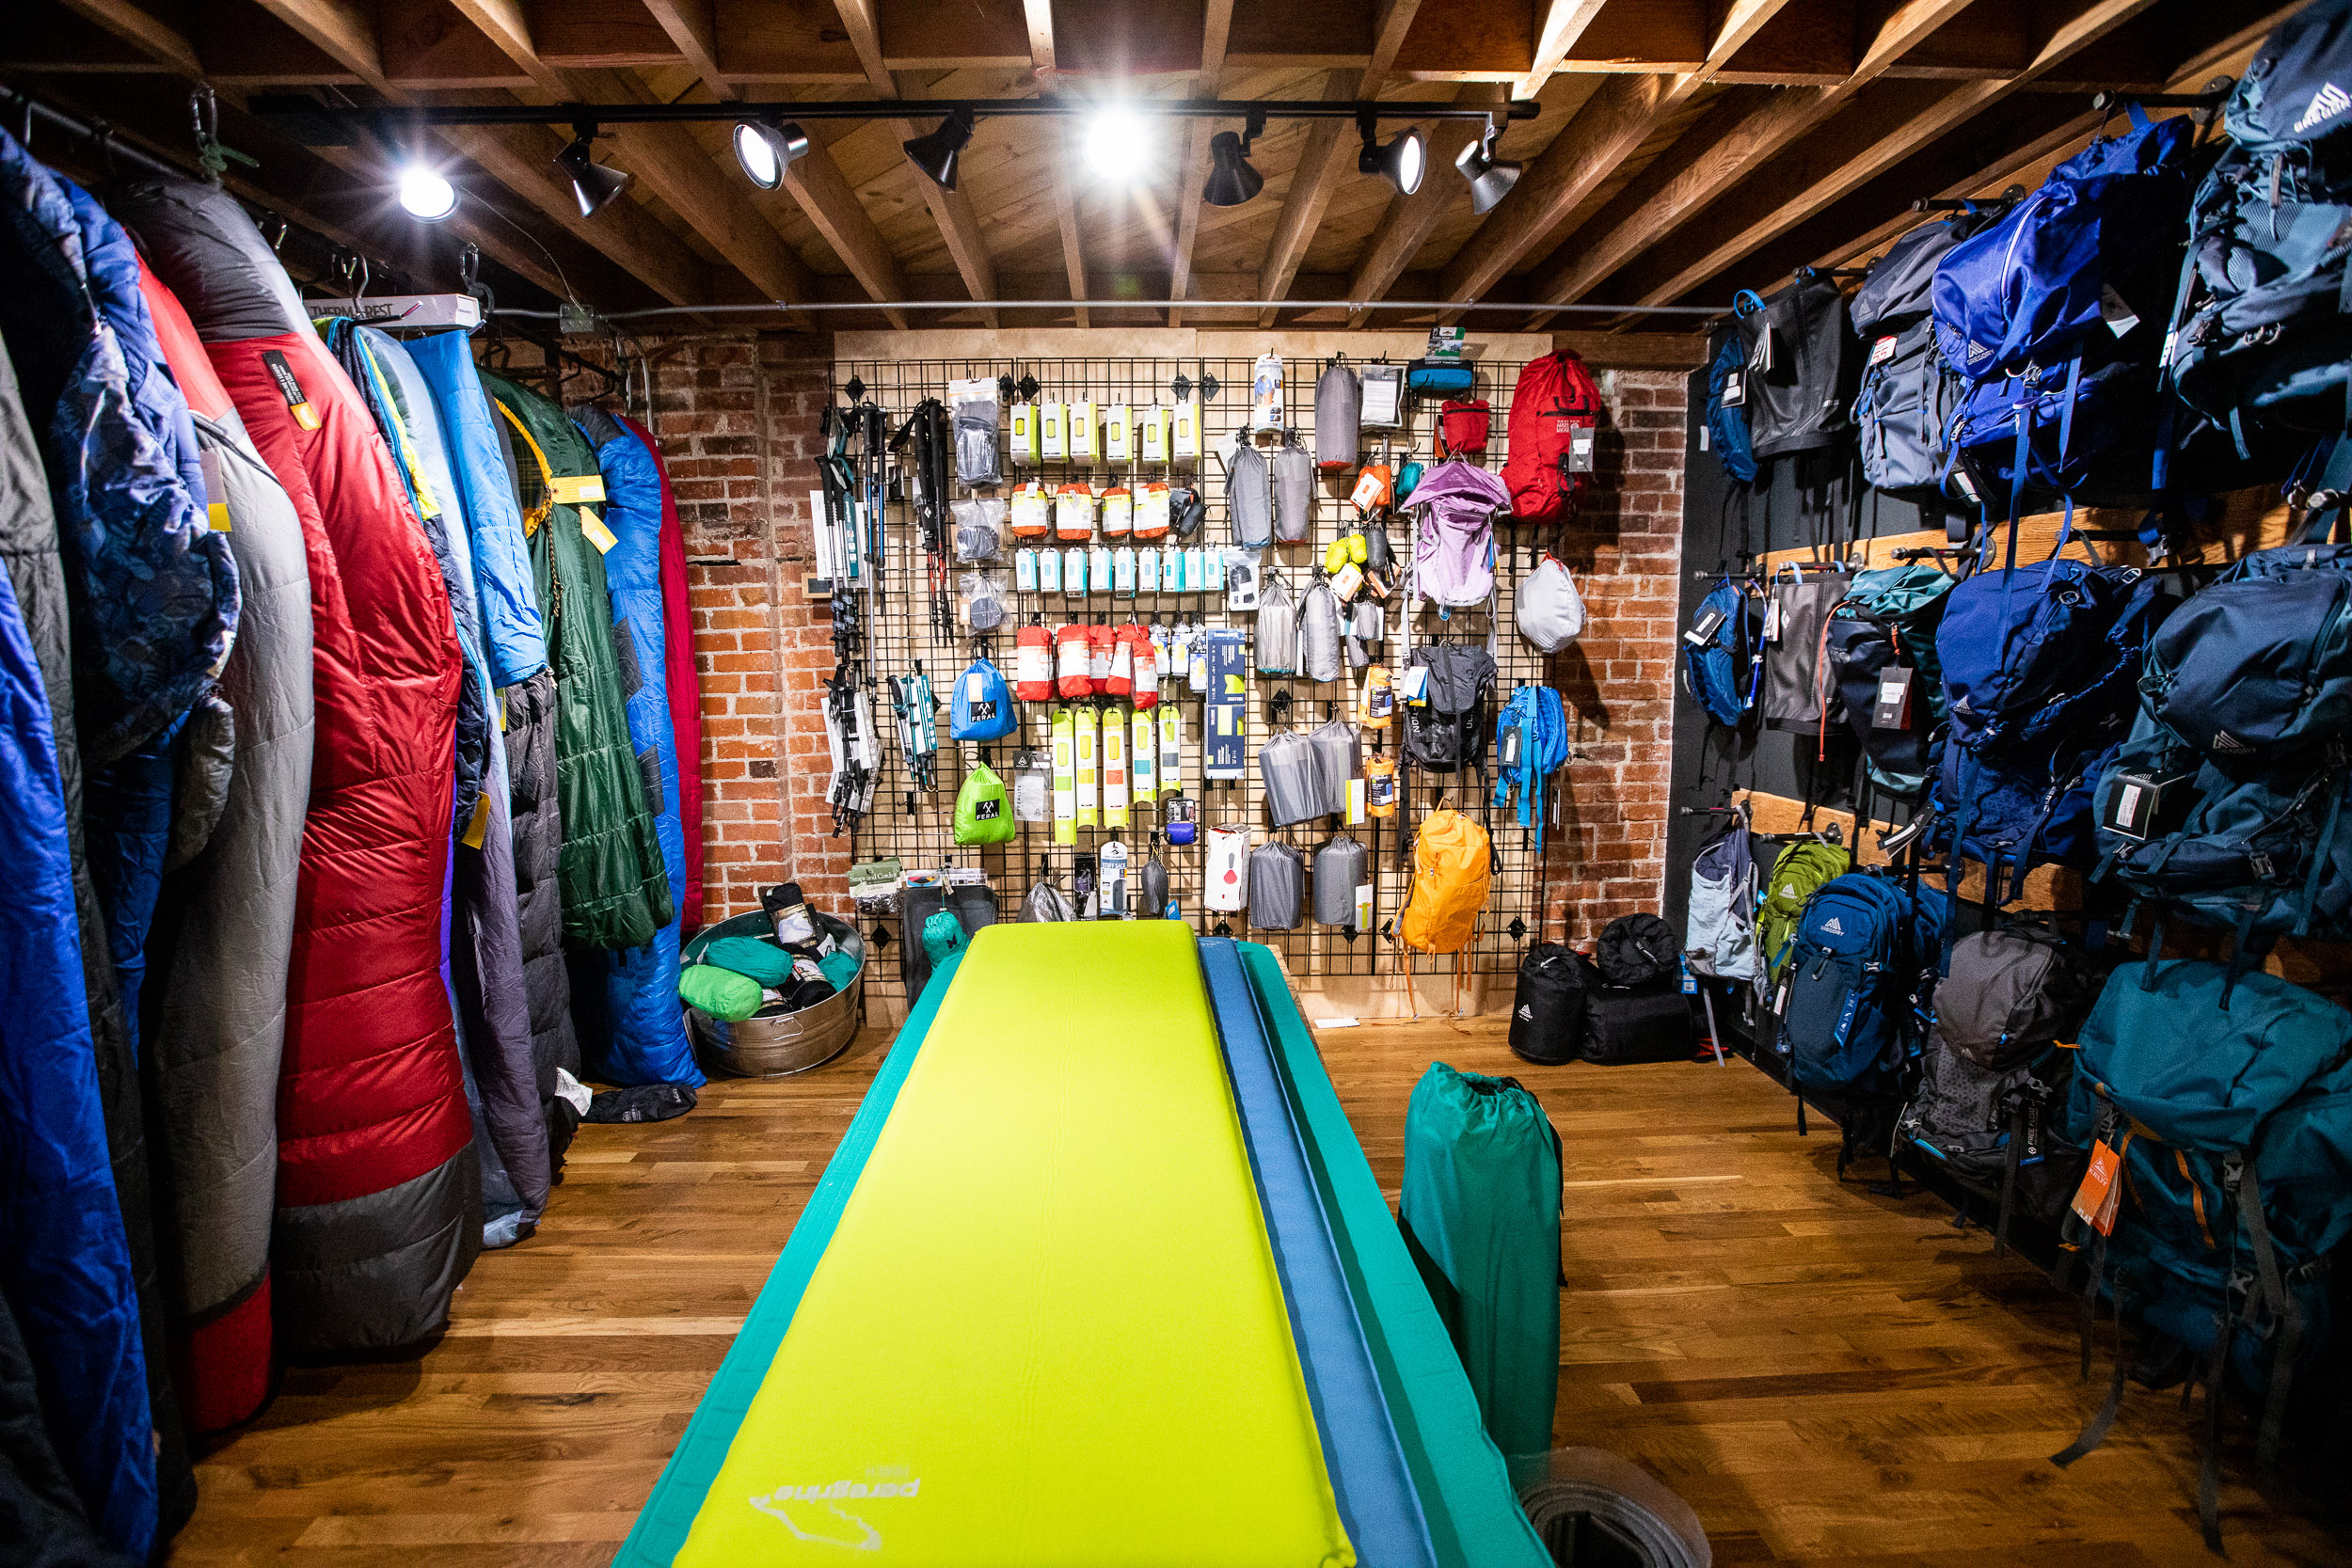 Meet Feral – The Outdoor Shop That Believes New Gear Doesn't